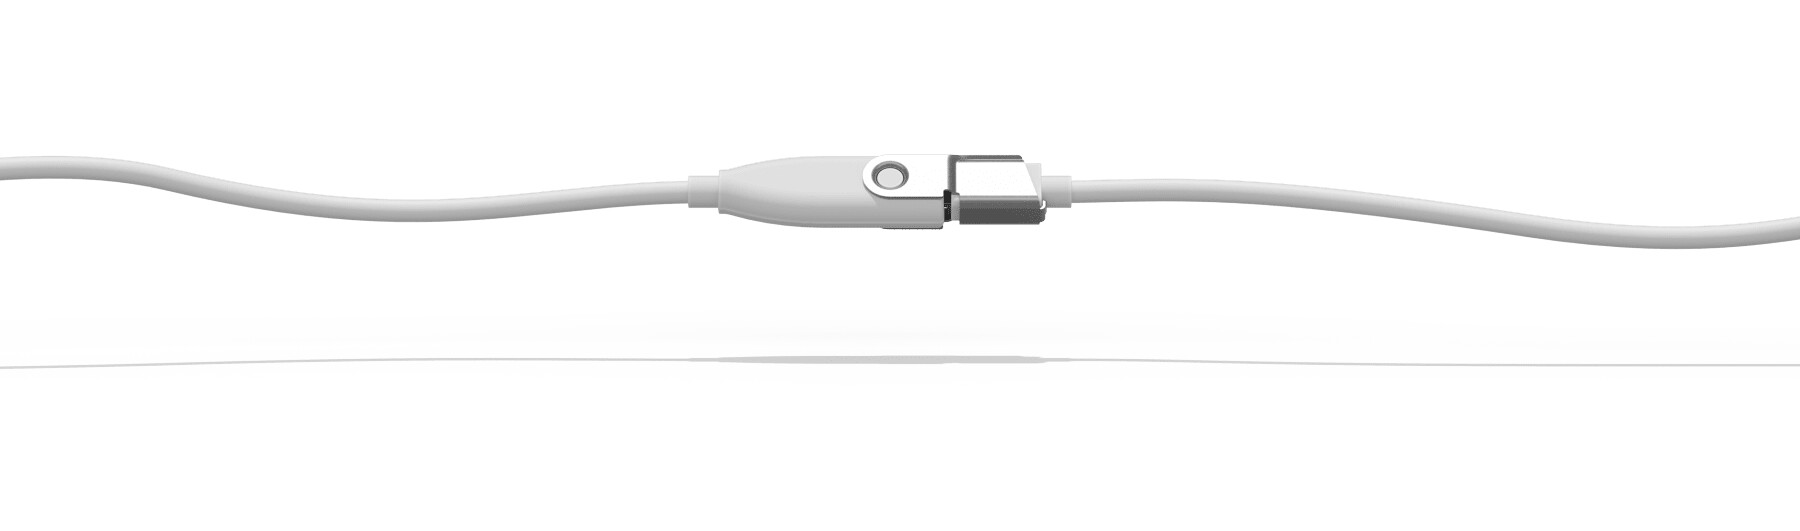 LOGITECH RALLY MIC POD EXTENSION CABLE WHITE - WW